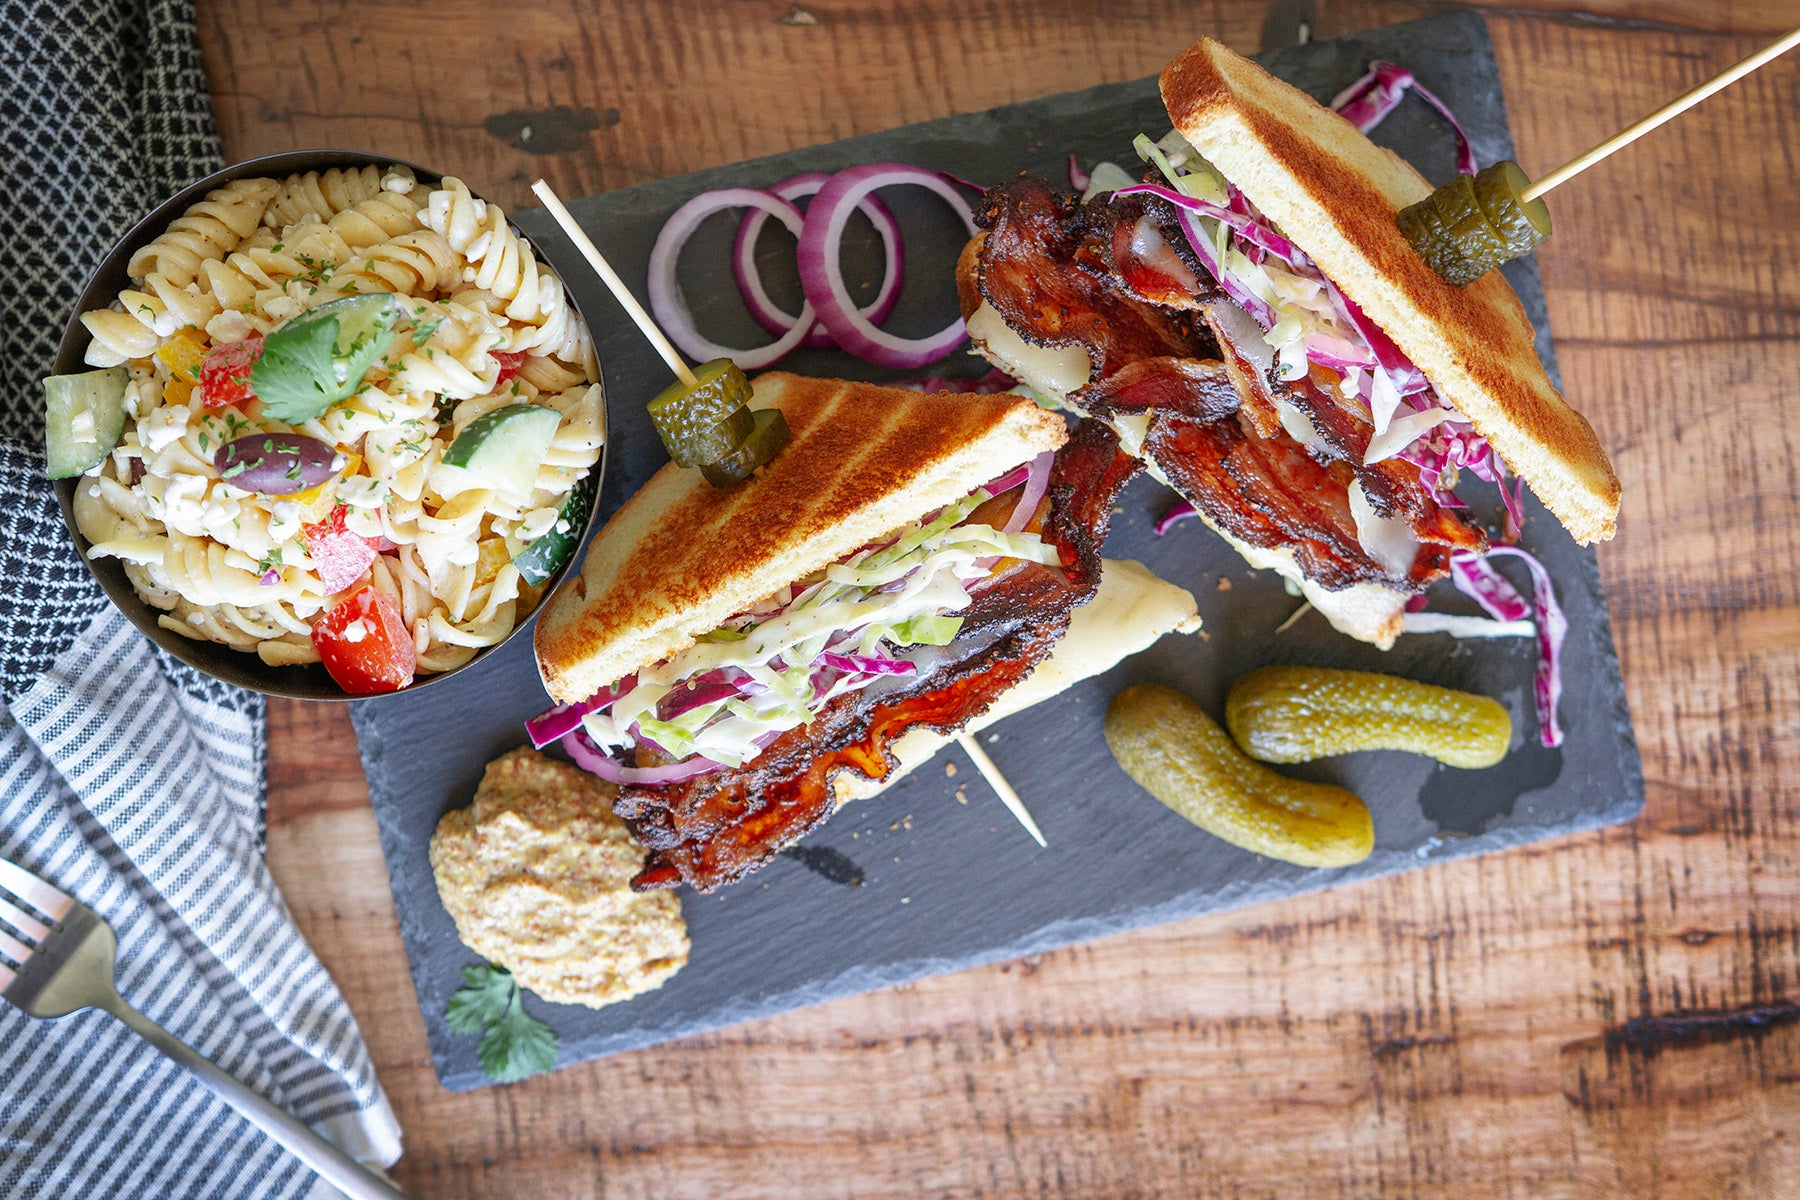 A pastrami bacon sandwich on toasted bread topped with a cabbage slaw and mustard. A small bowl of pasta salad sits near the sandwich, as well as small dill pickles.